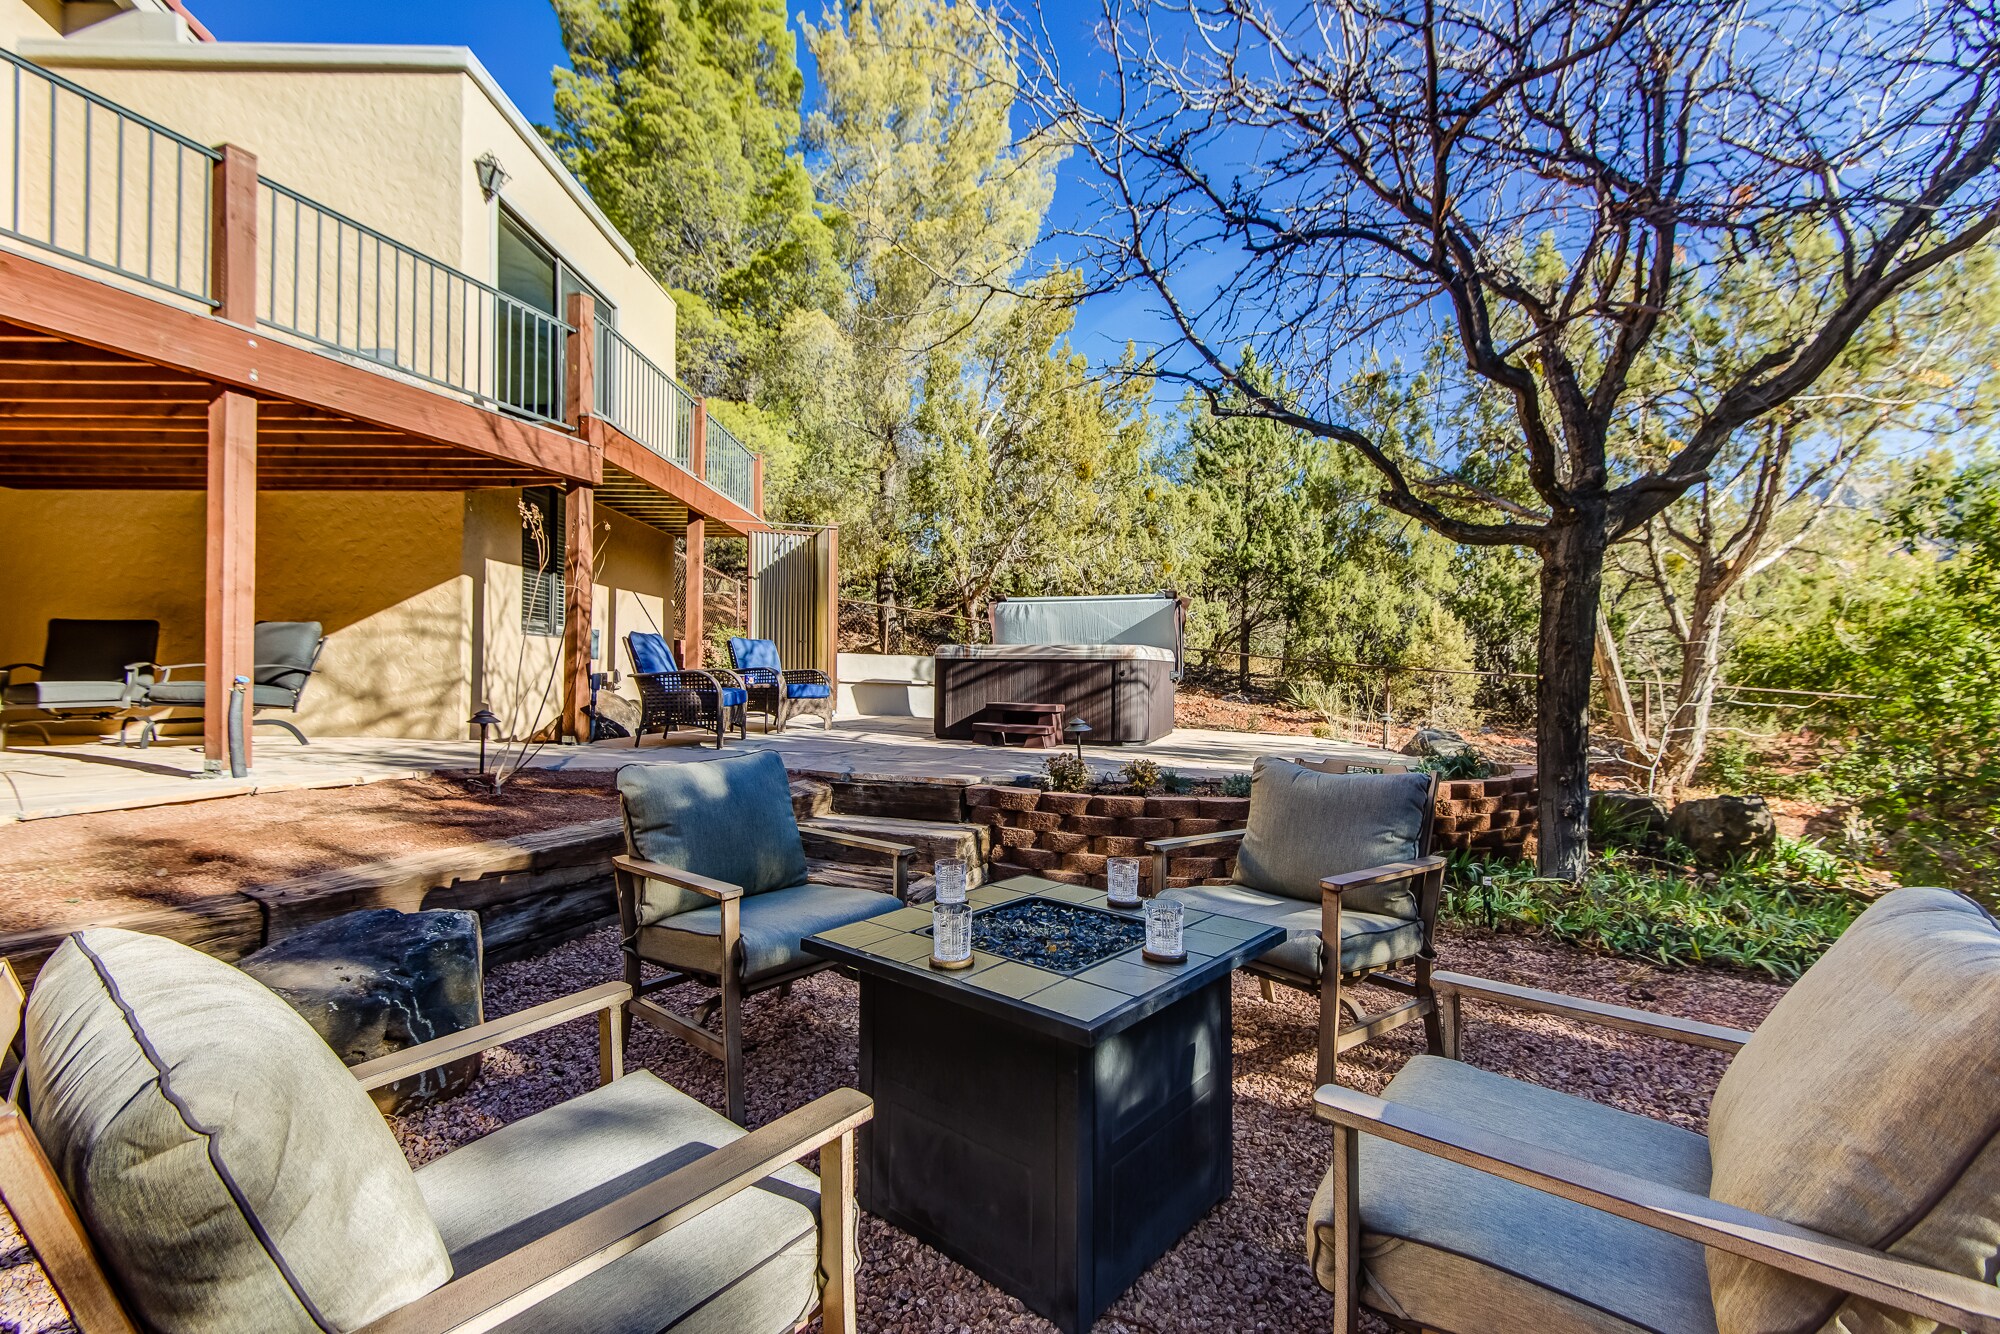 Large Private Backyard with a Fire Pit and Hot Tub